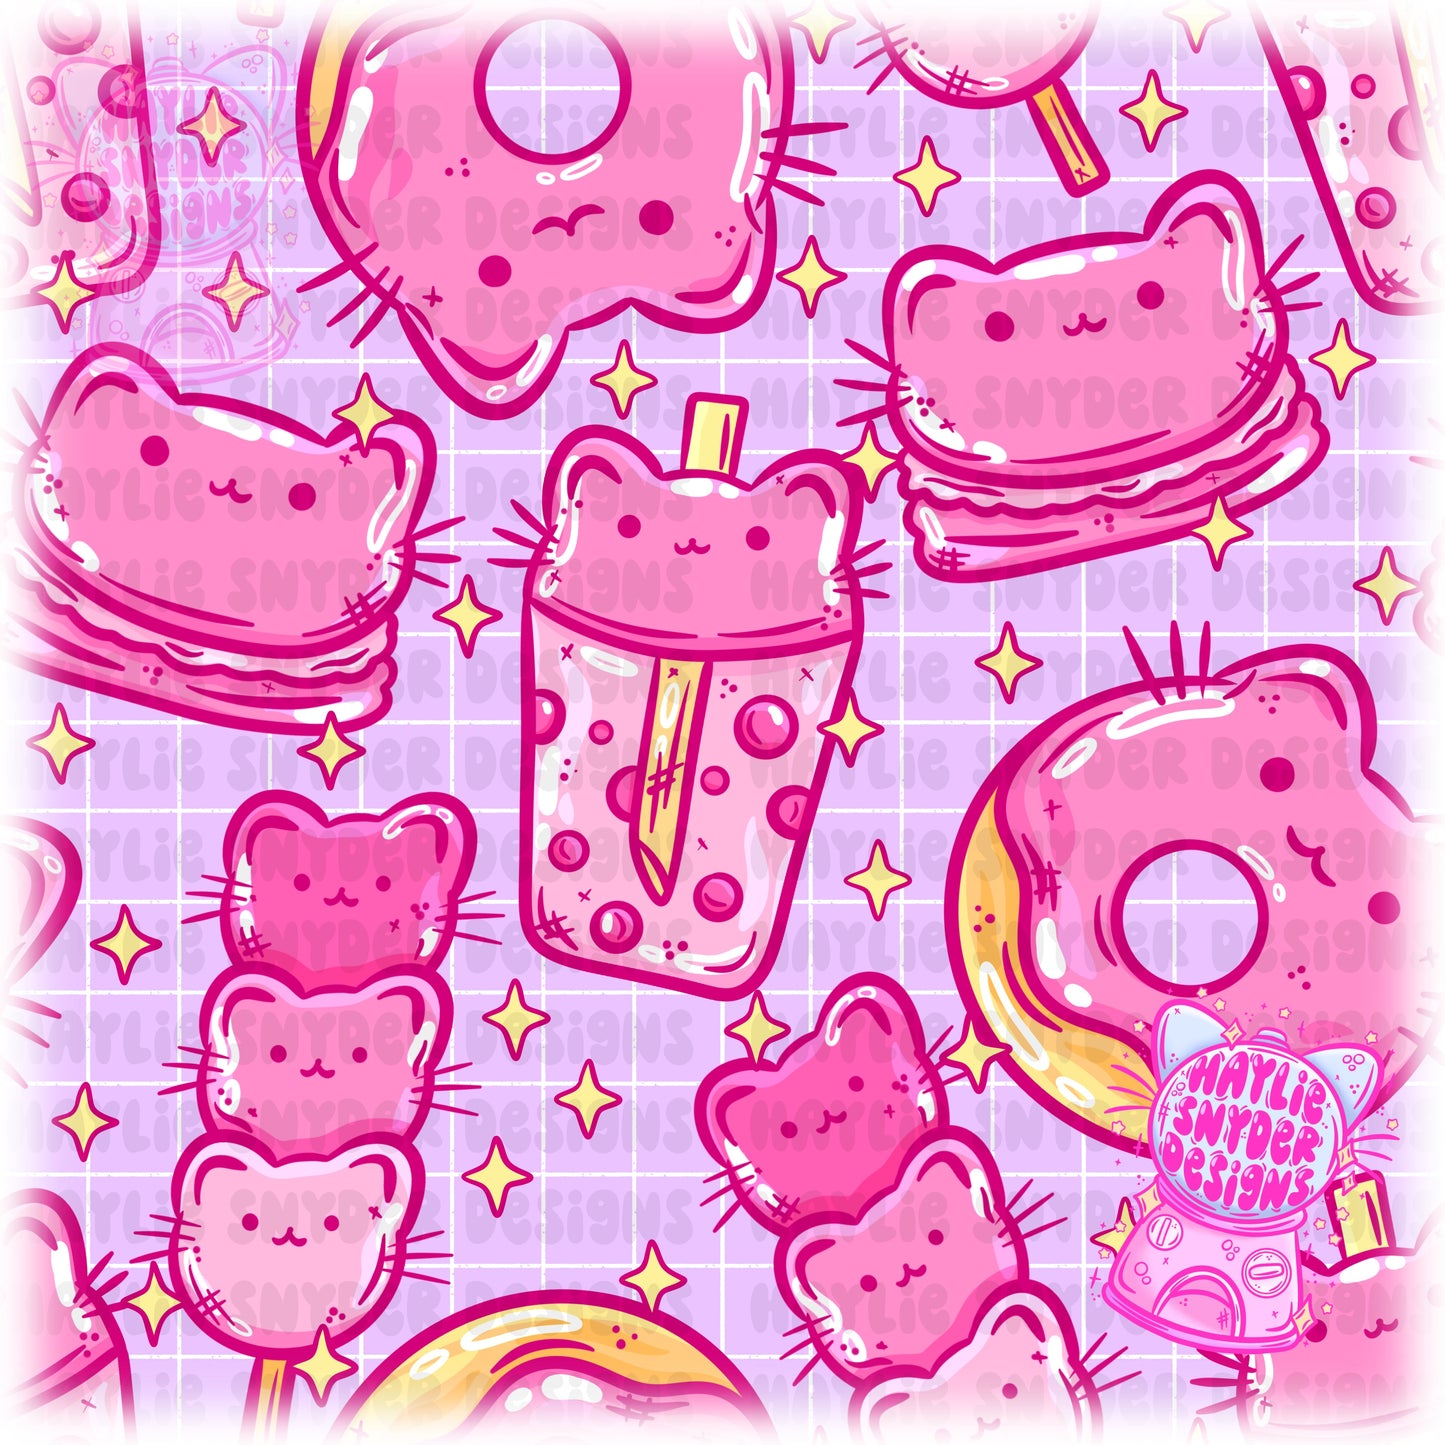 Kitty Sweets